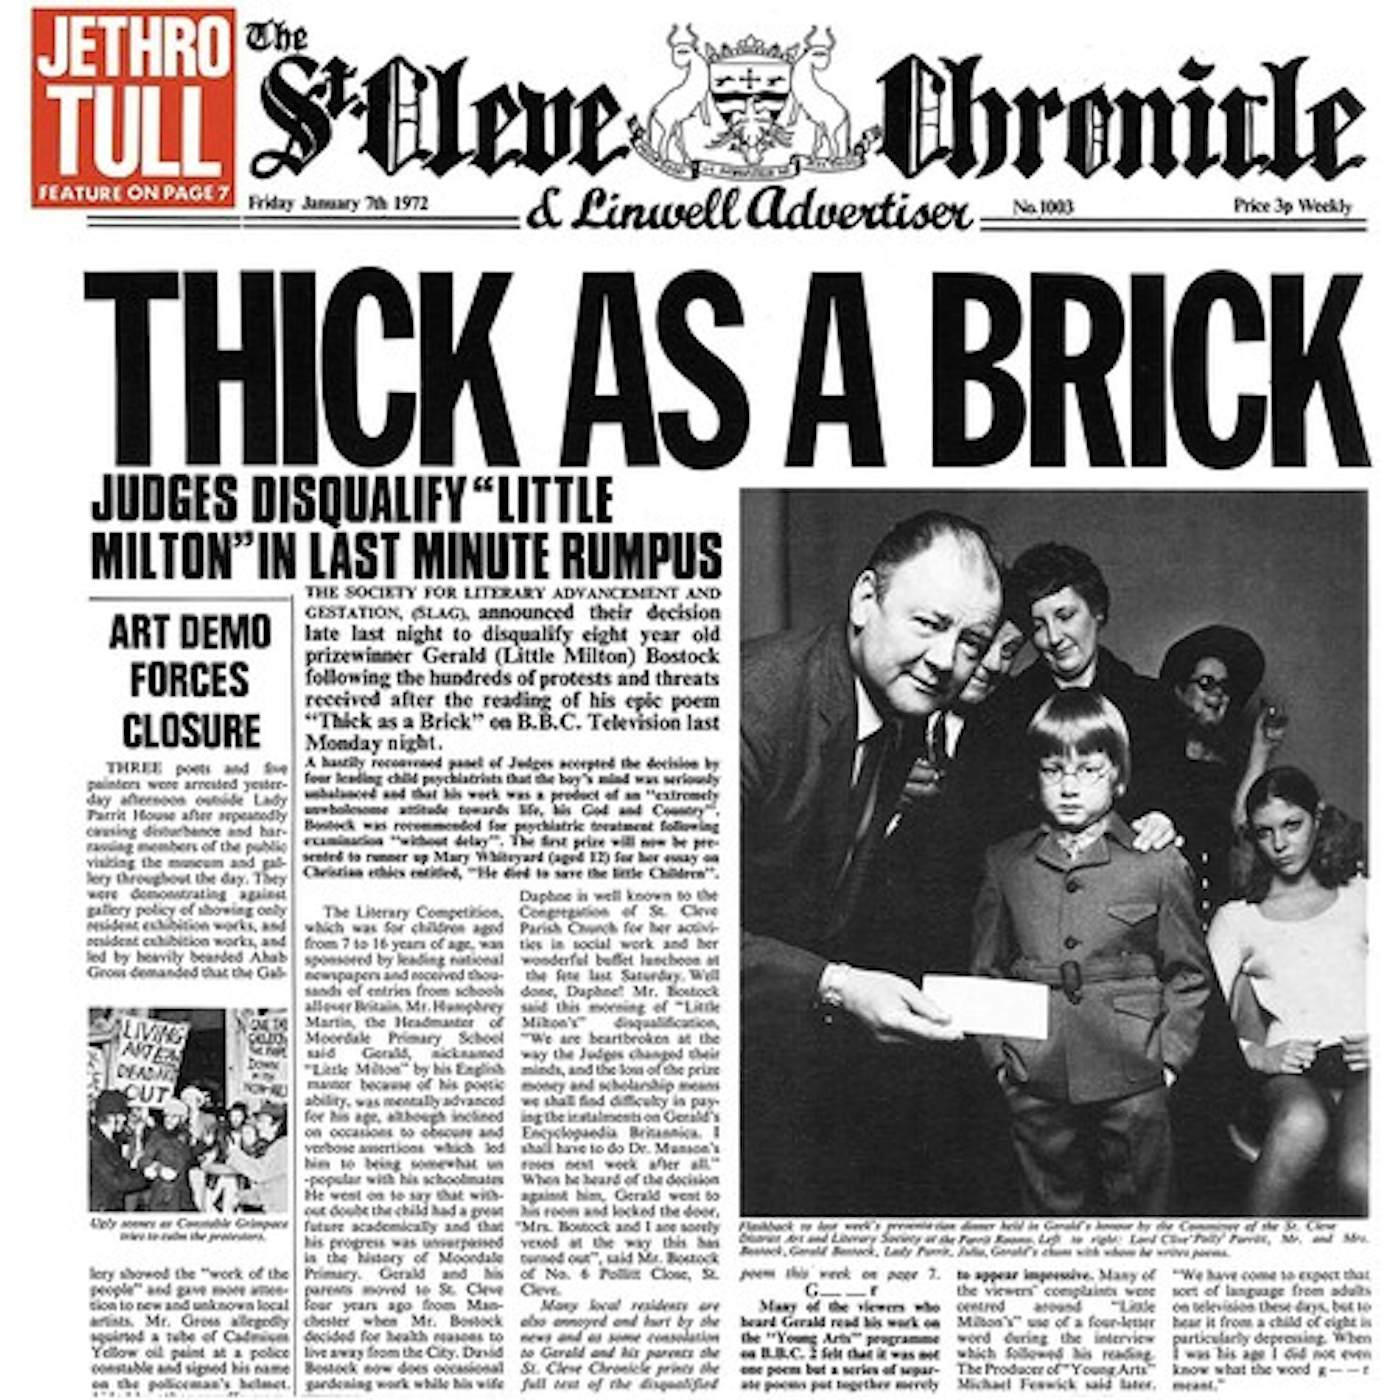 Jethro Tull THICK AS A BRICK (40TH ANNIVERSARY EDITION) CD